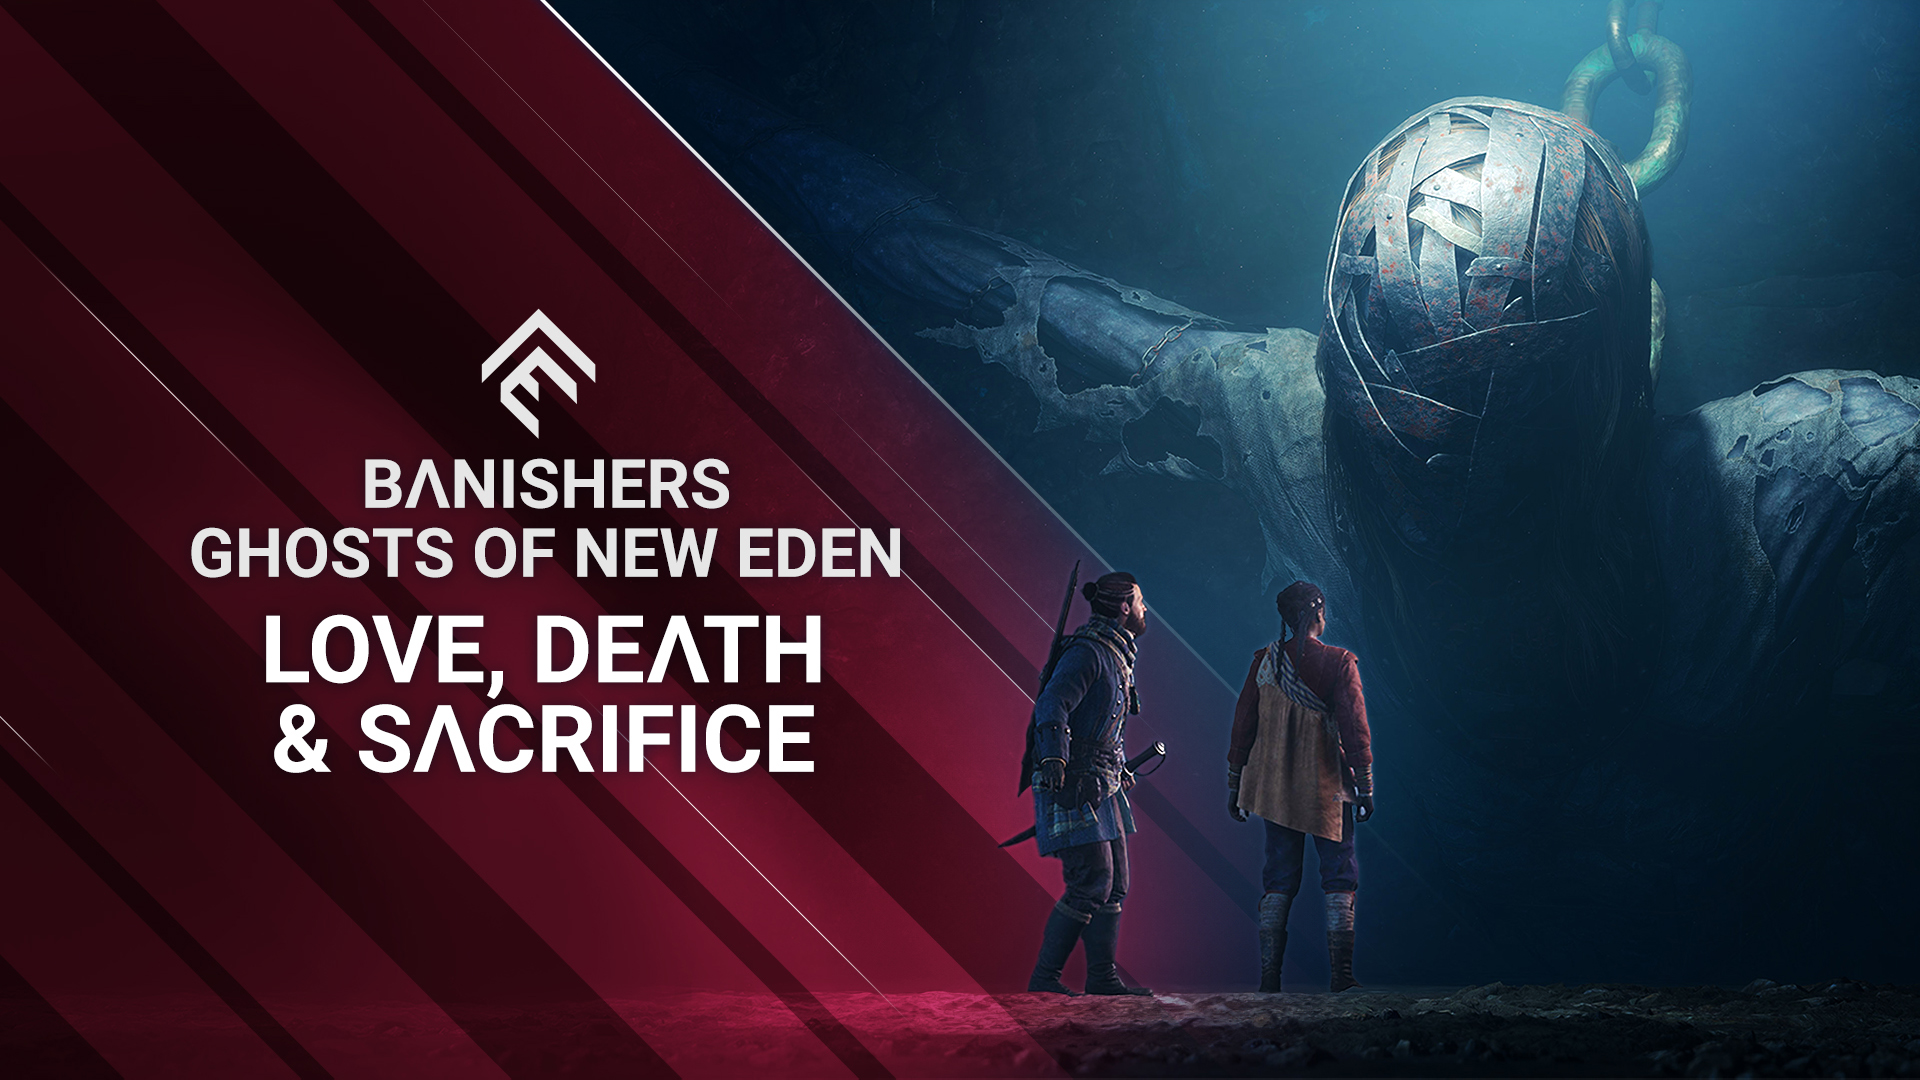 Watch the hero trailer for Banishers: Ghosts of New Eden!